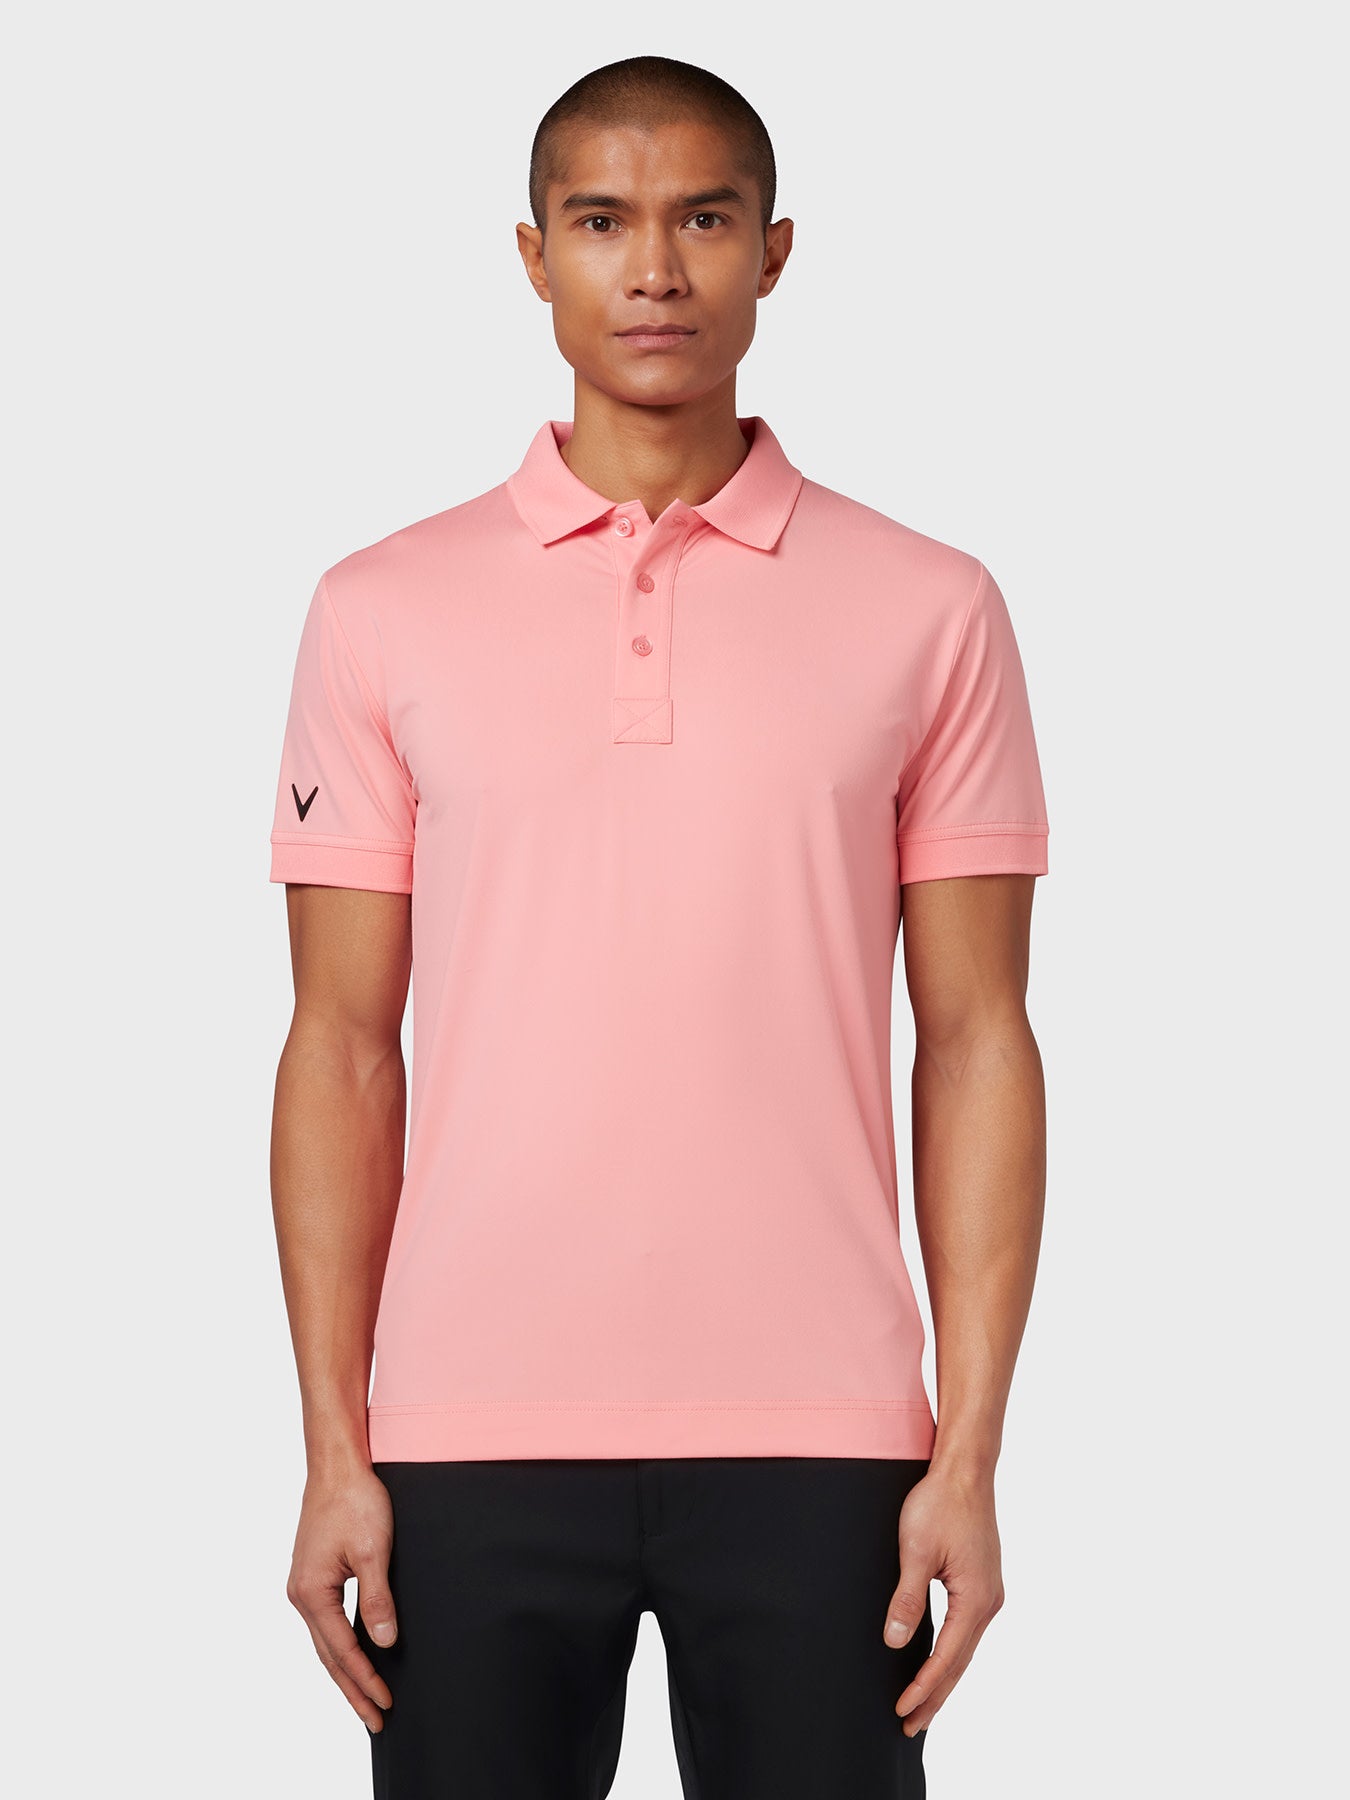 View X Series Solid Ribbed Polo In Geranium Pink Geranium Pink XXL information